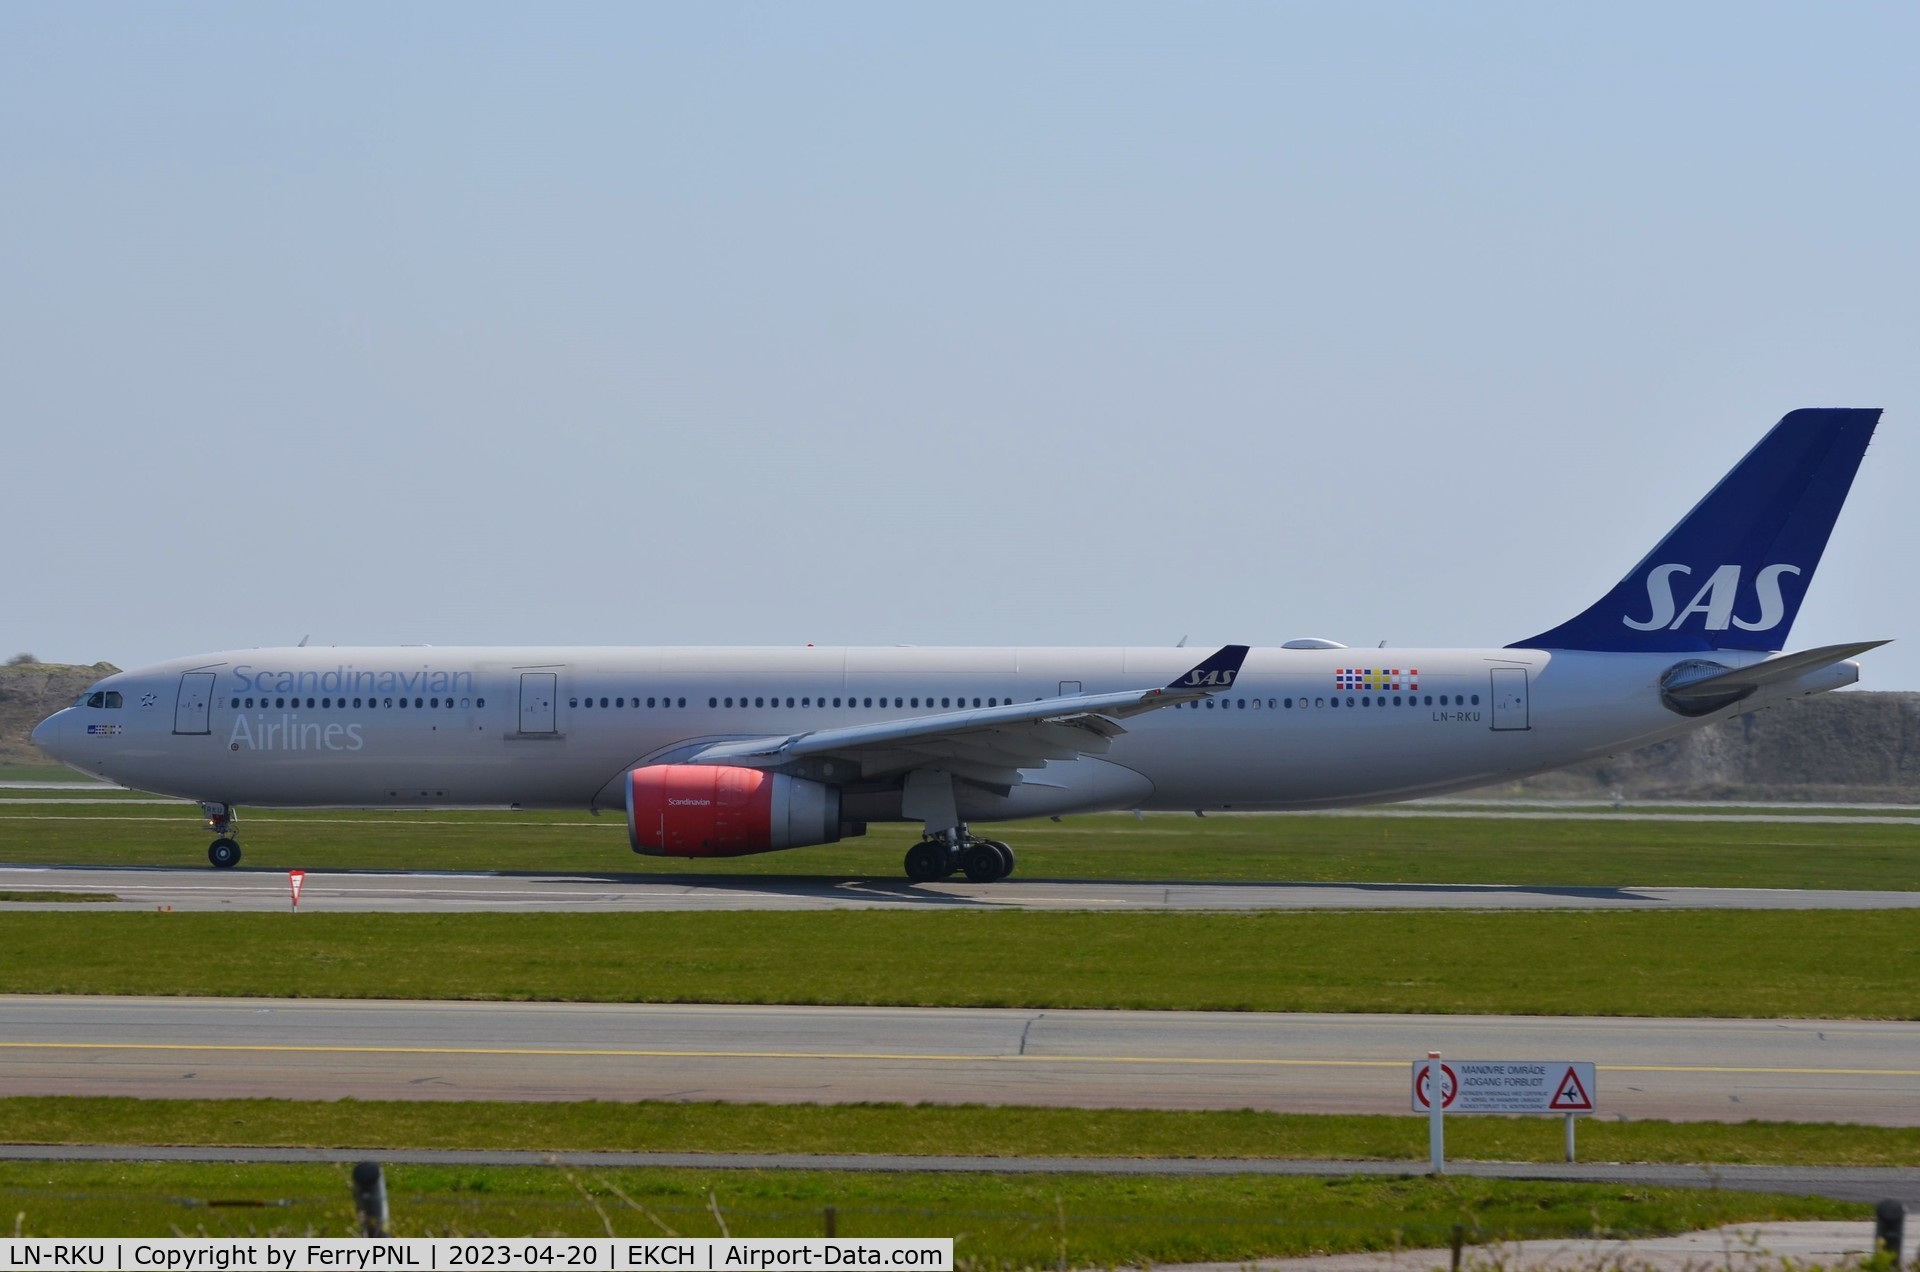 LN-RKU, 2016 Airbus A330-343 C/N 1715, SAS A333 taxying to the runway